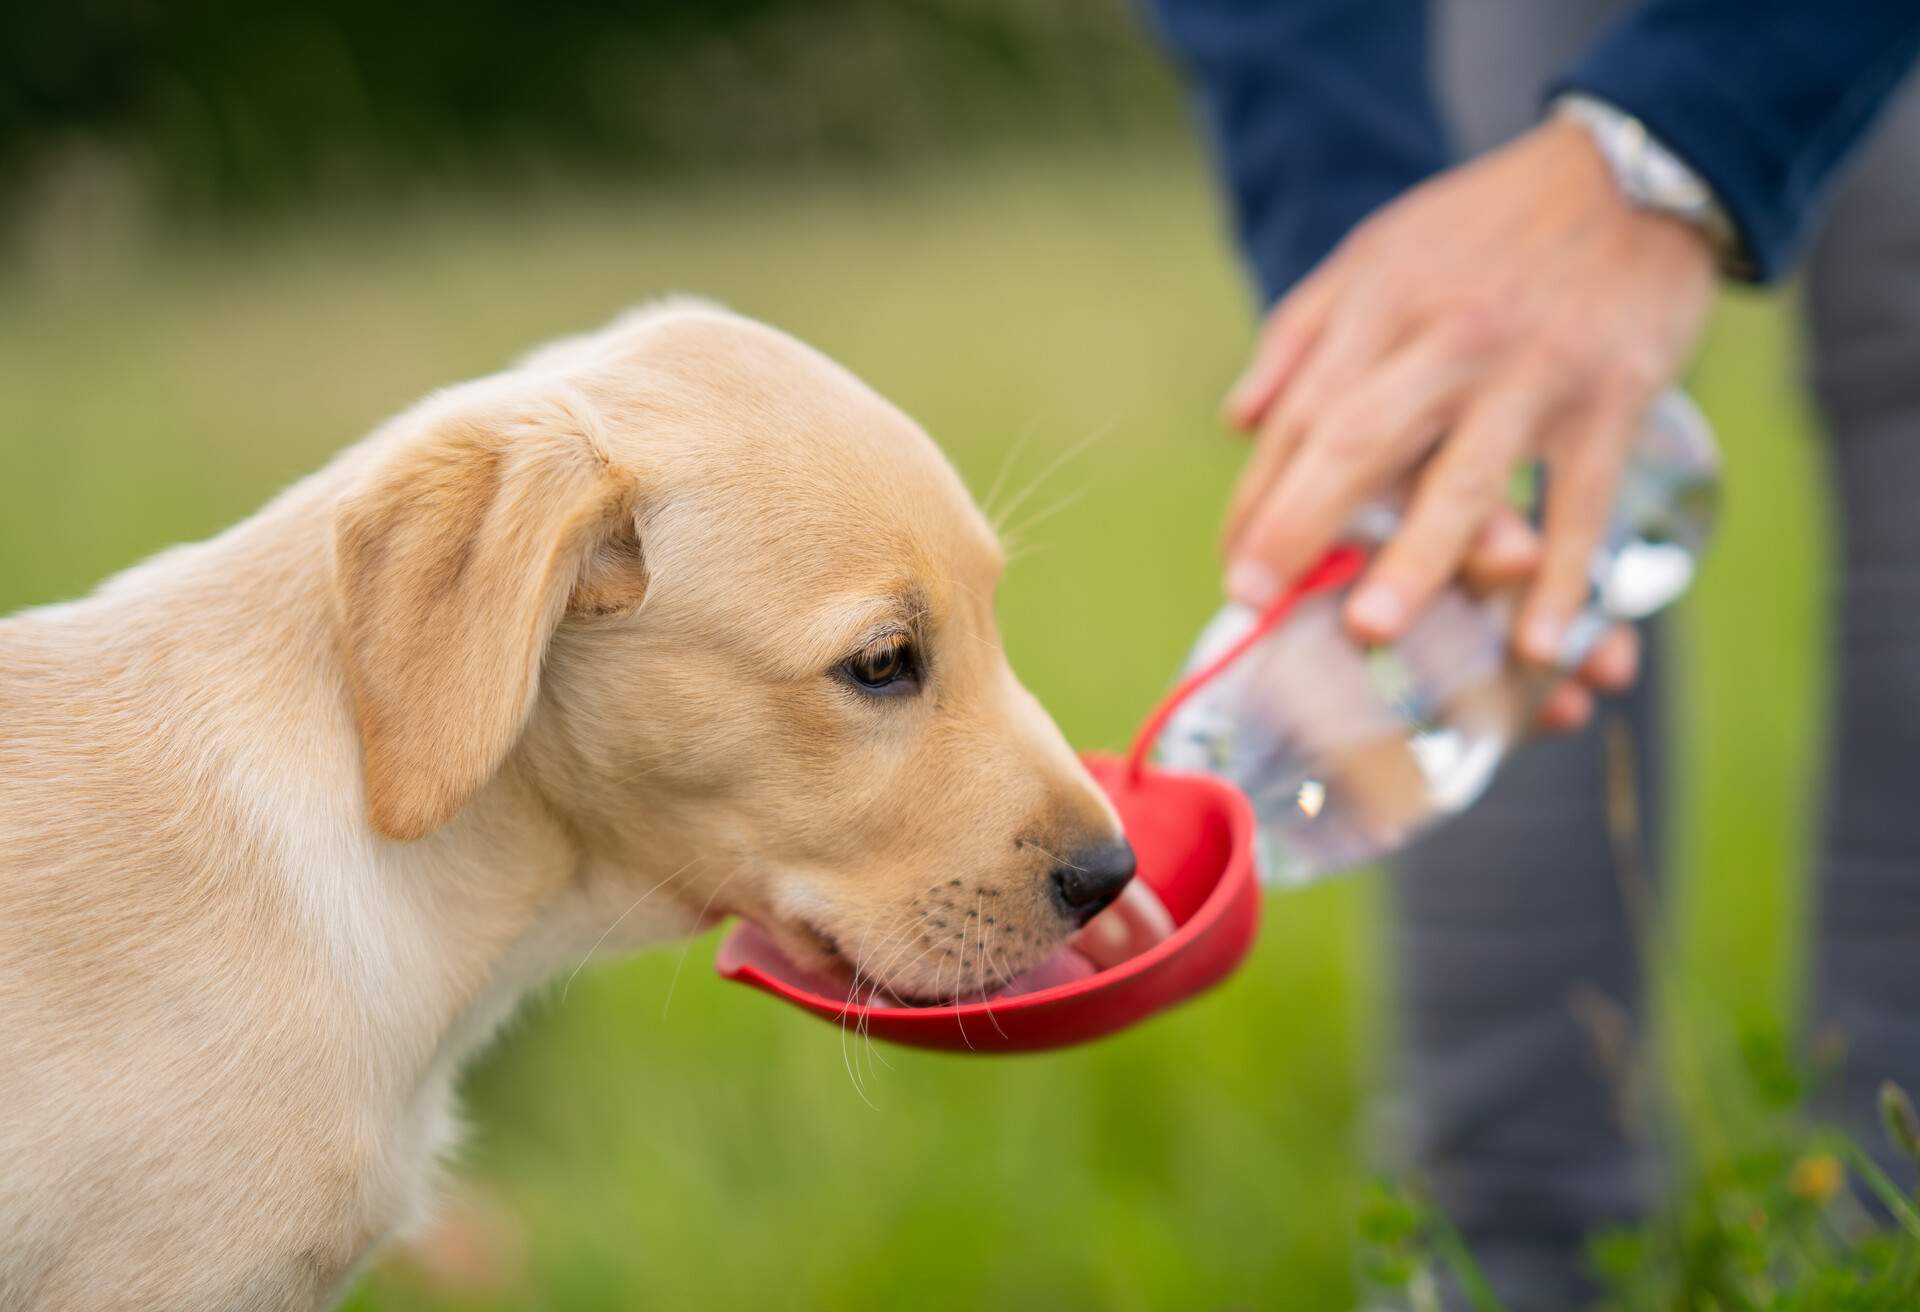 labrador puppy drinking water from dog bottle outdoors during walk